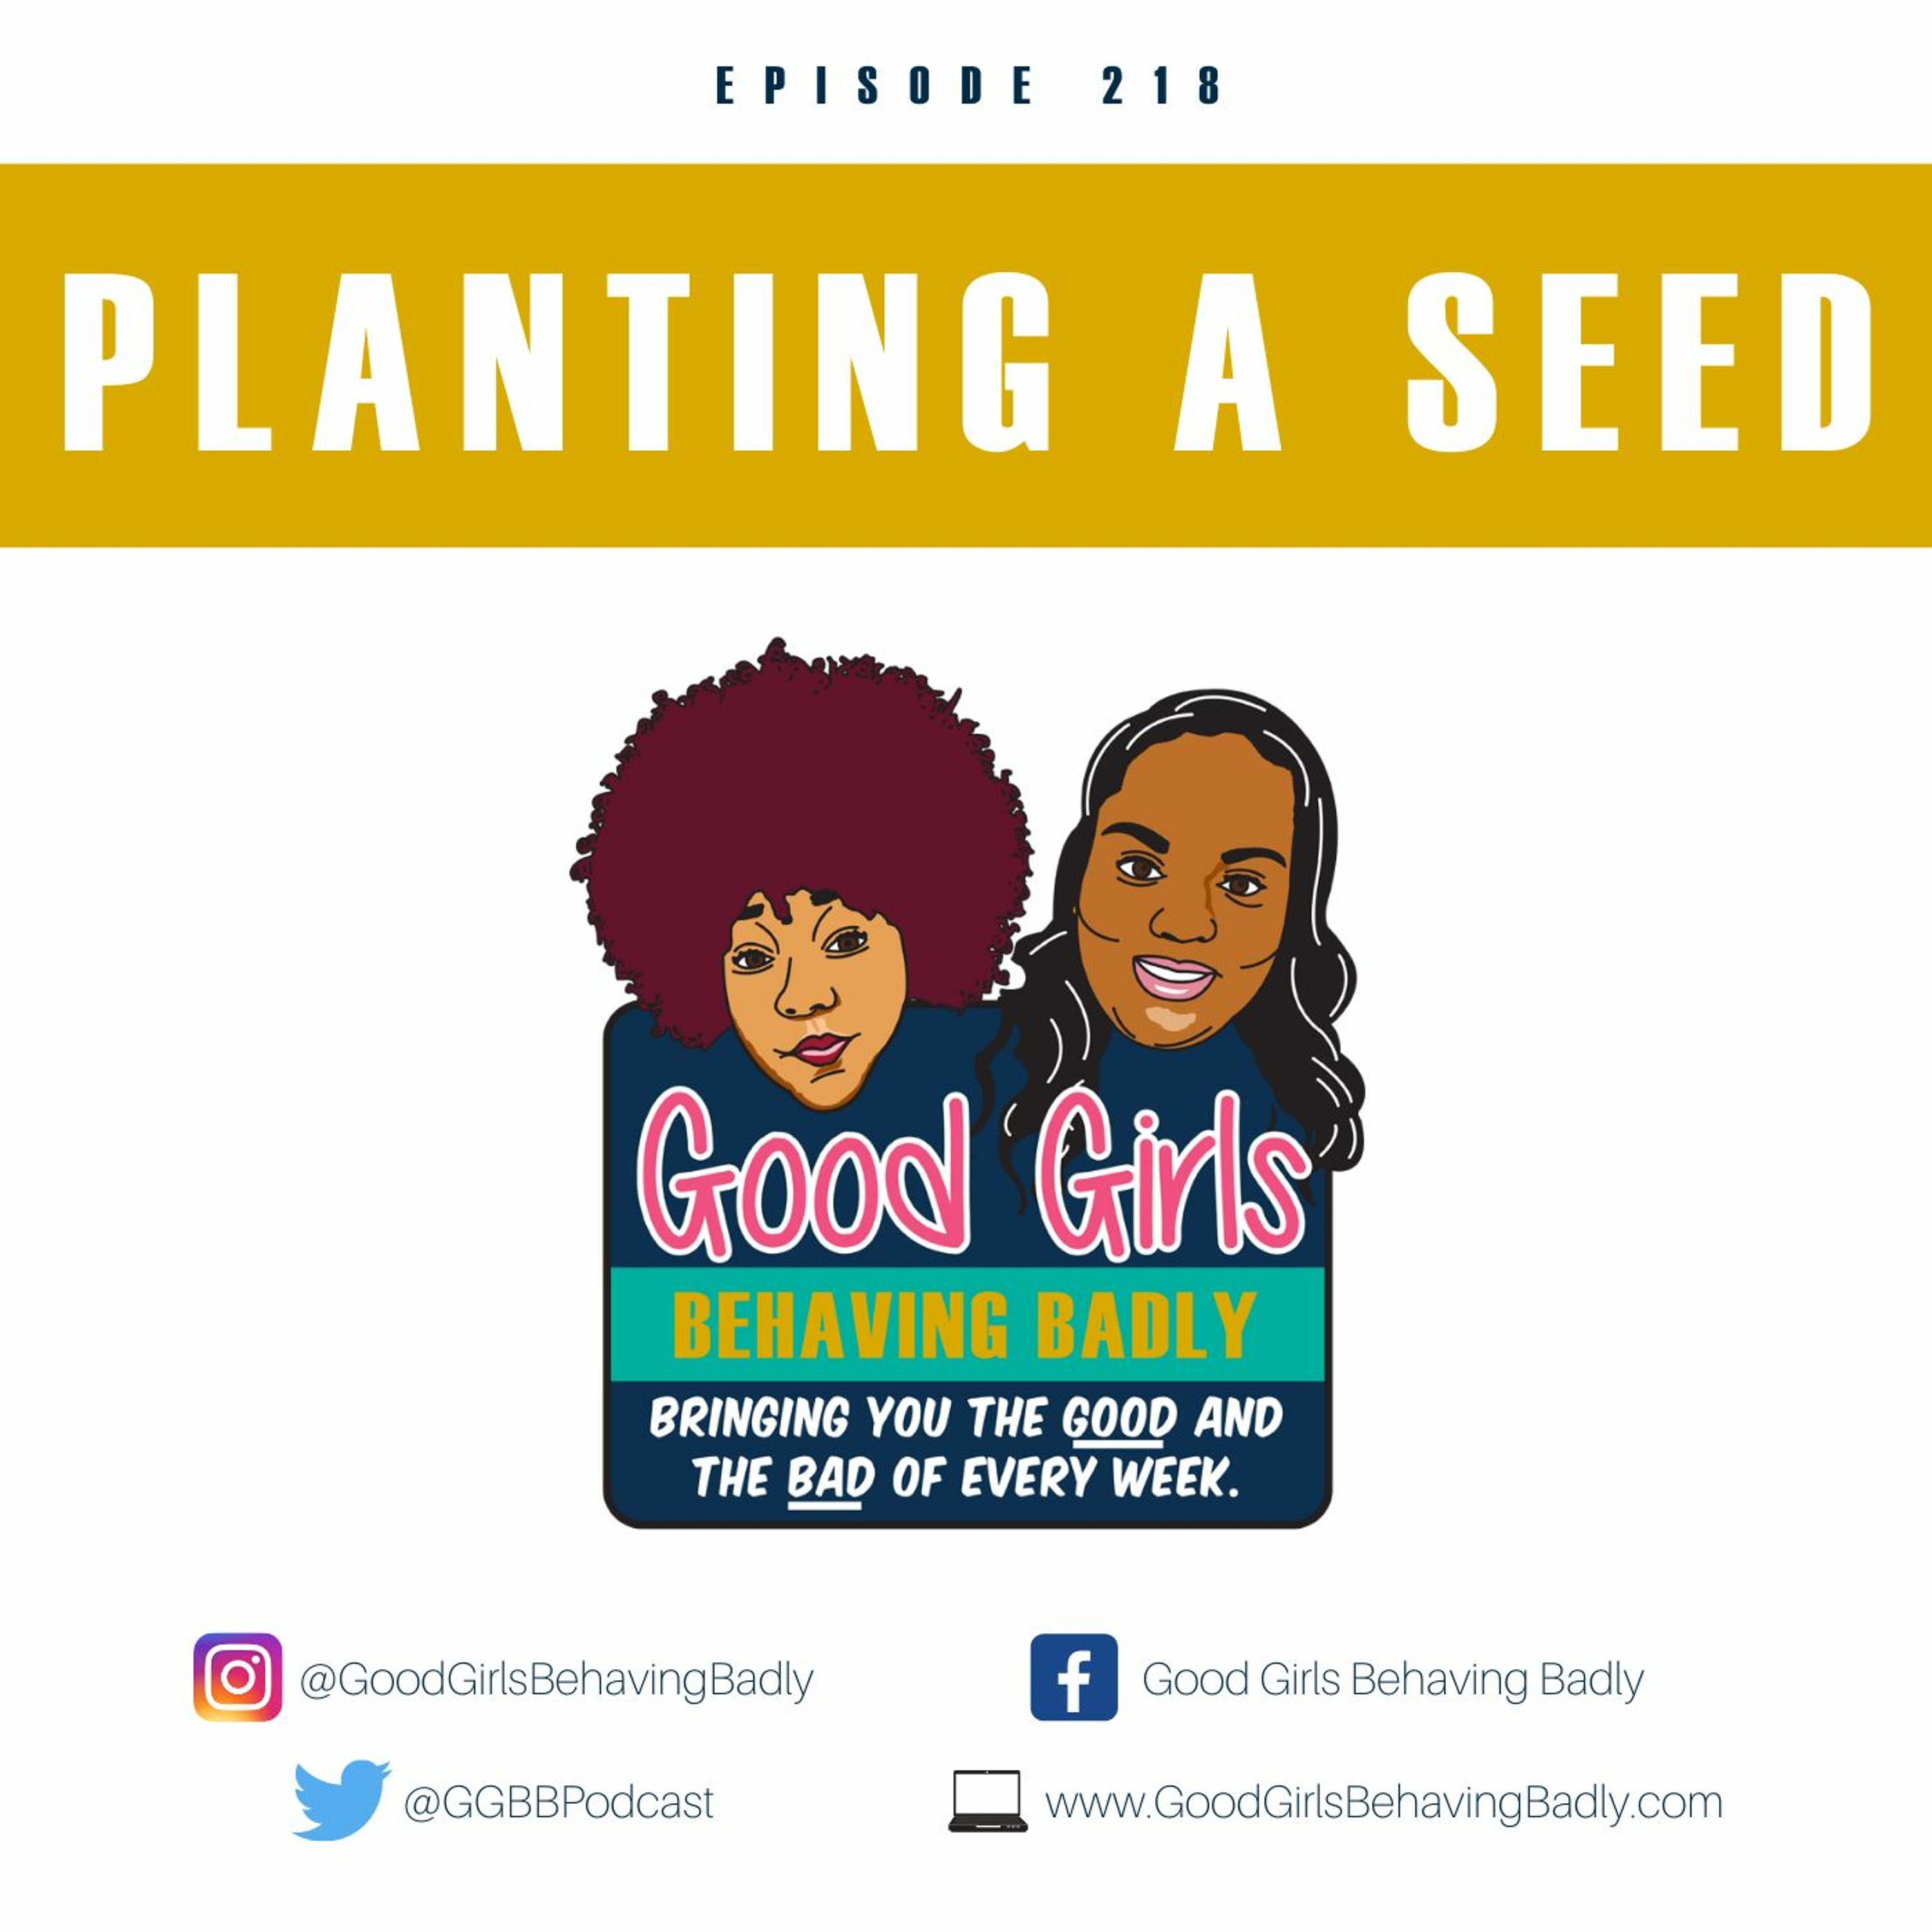 Episode 218: Planting A Seed